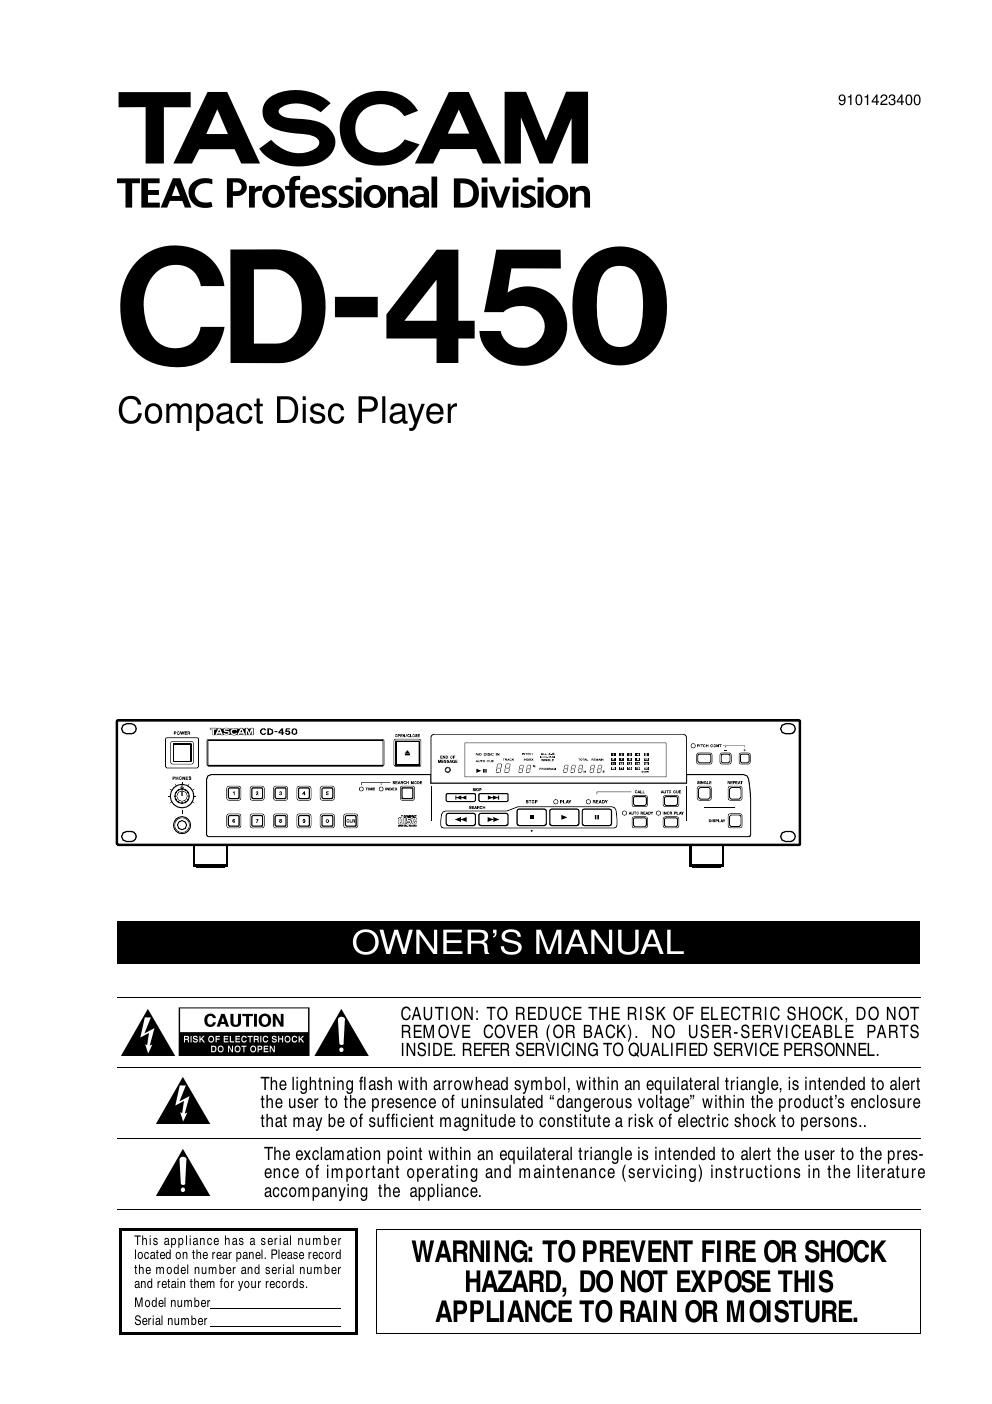 Tascam CD 450 Owners Manual